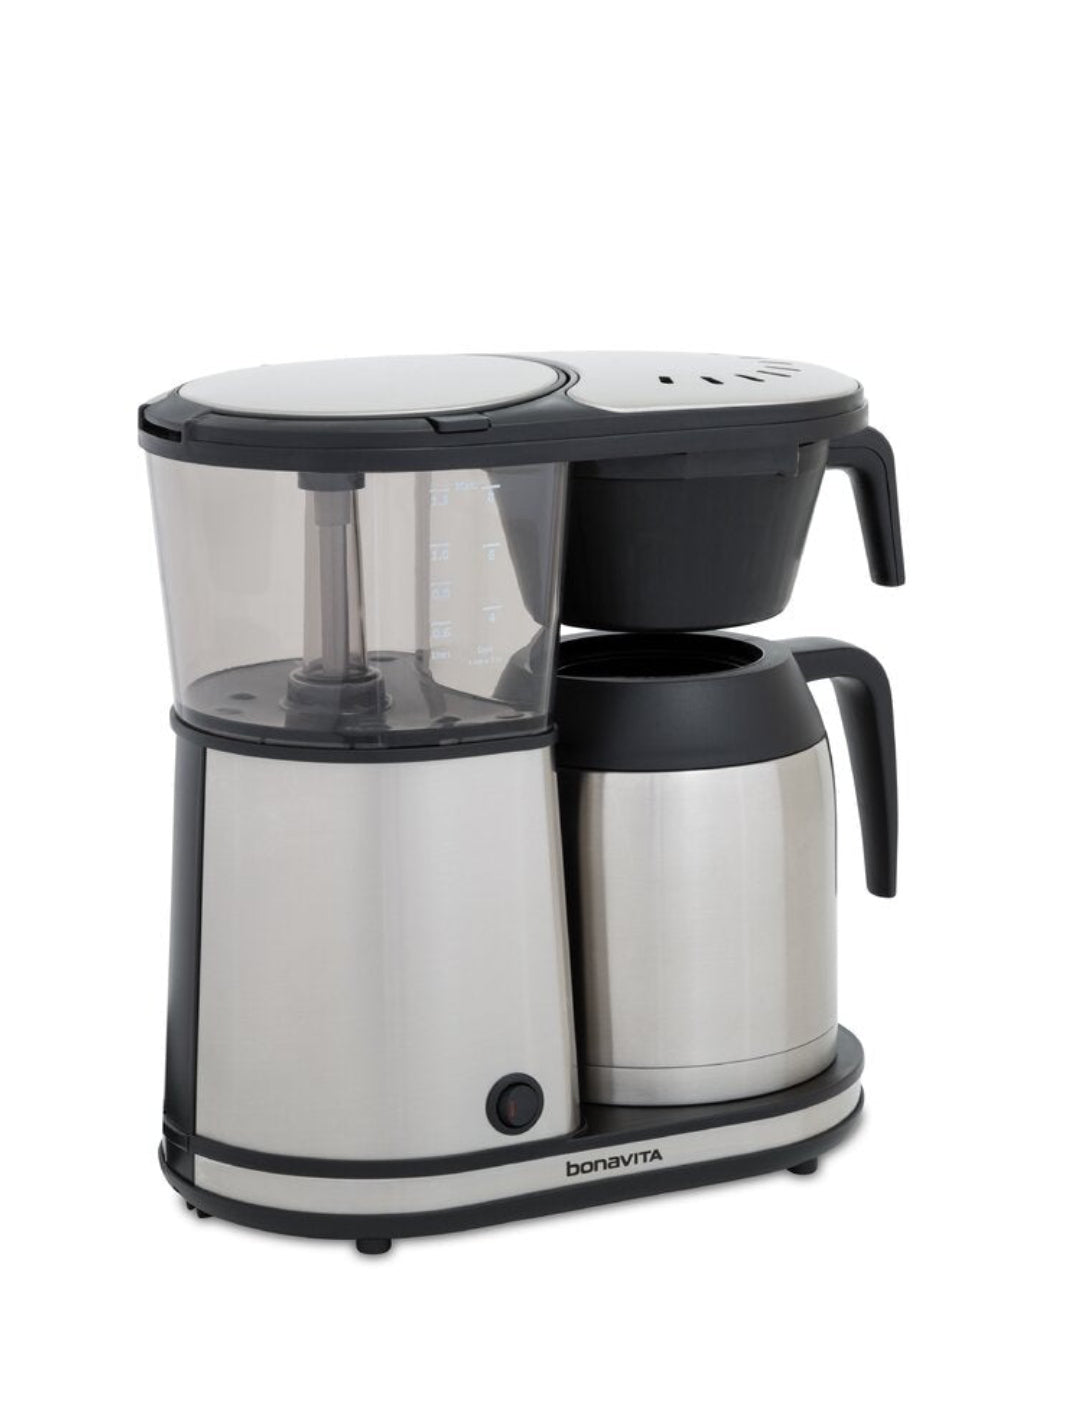 BONAVITA Connoisseur One-Touch Thermal Carafe Coffee Brewer (8-Cup